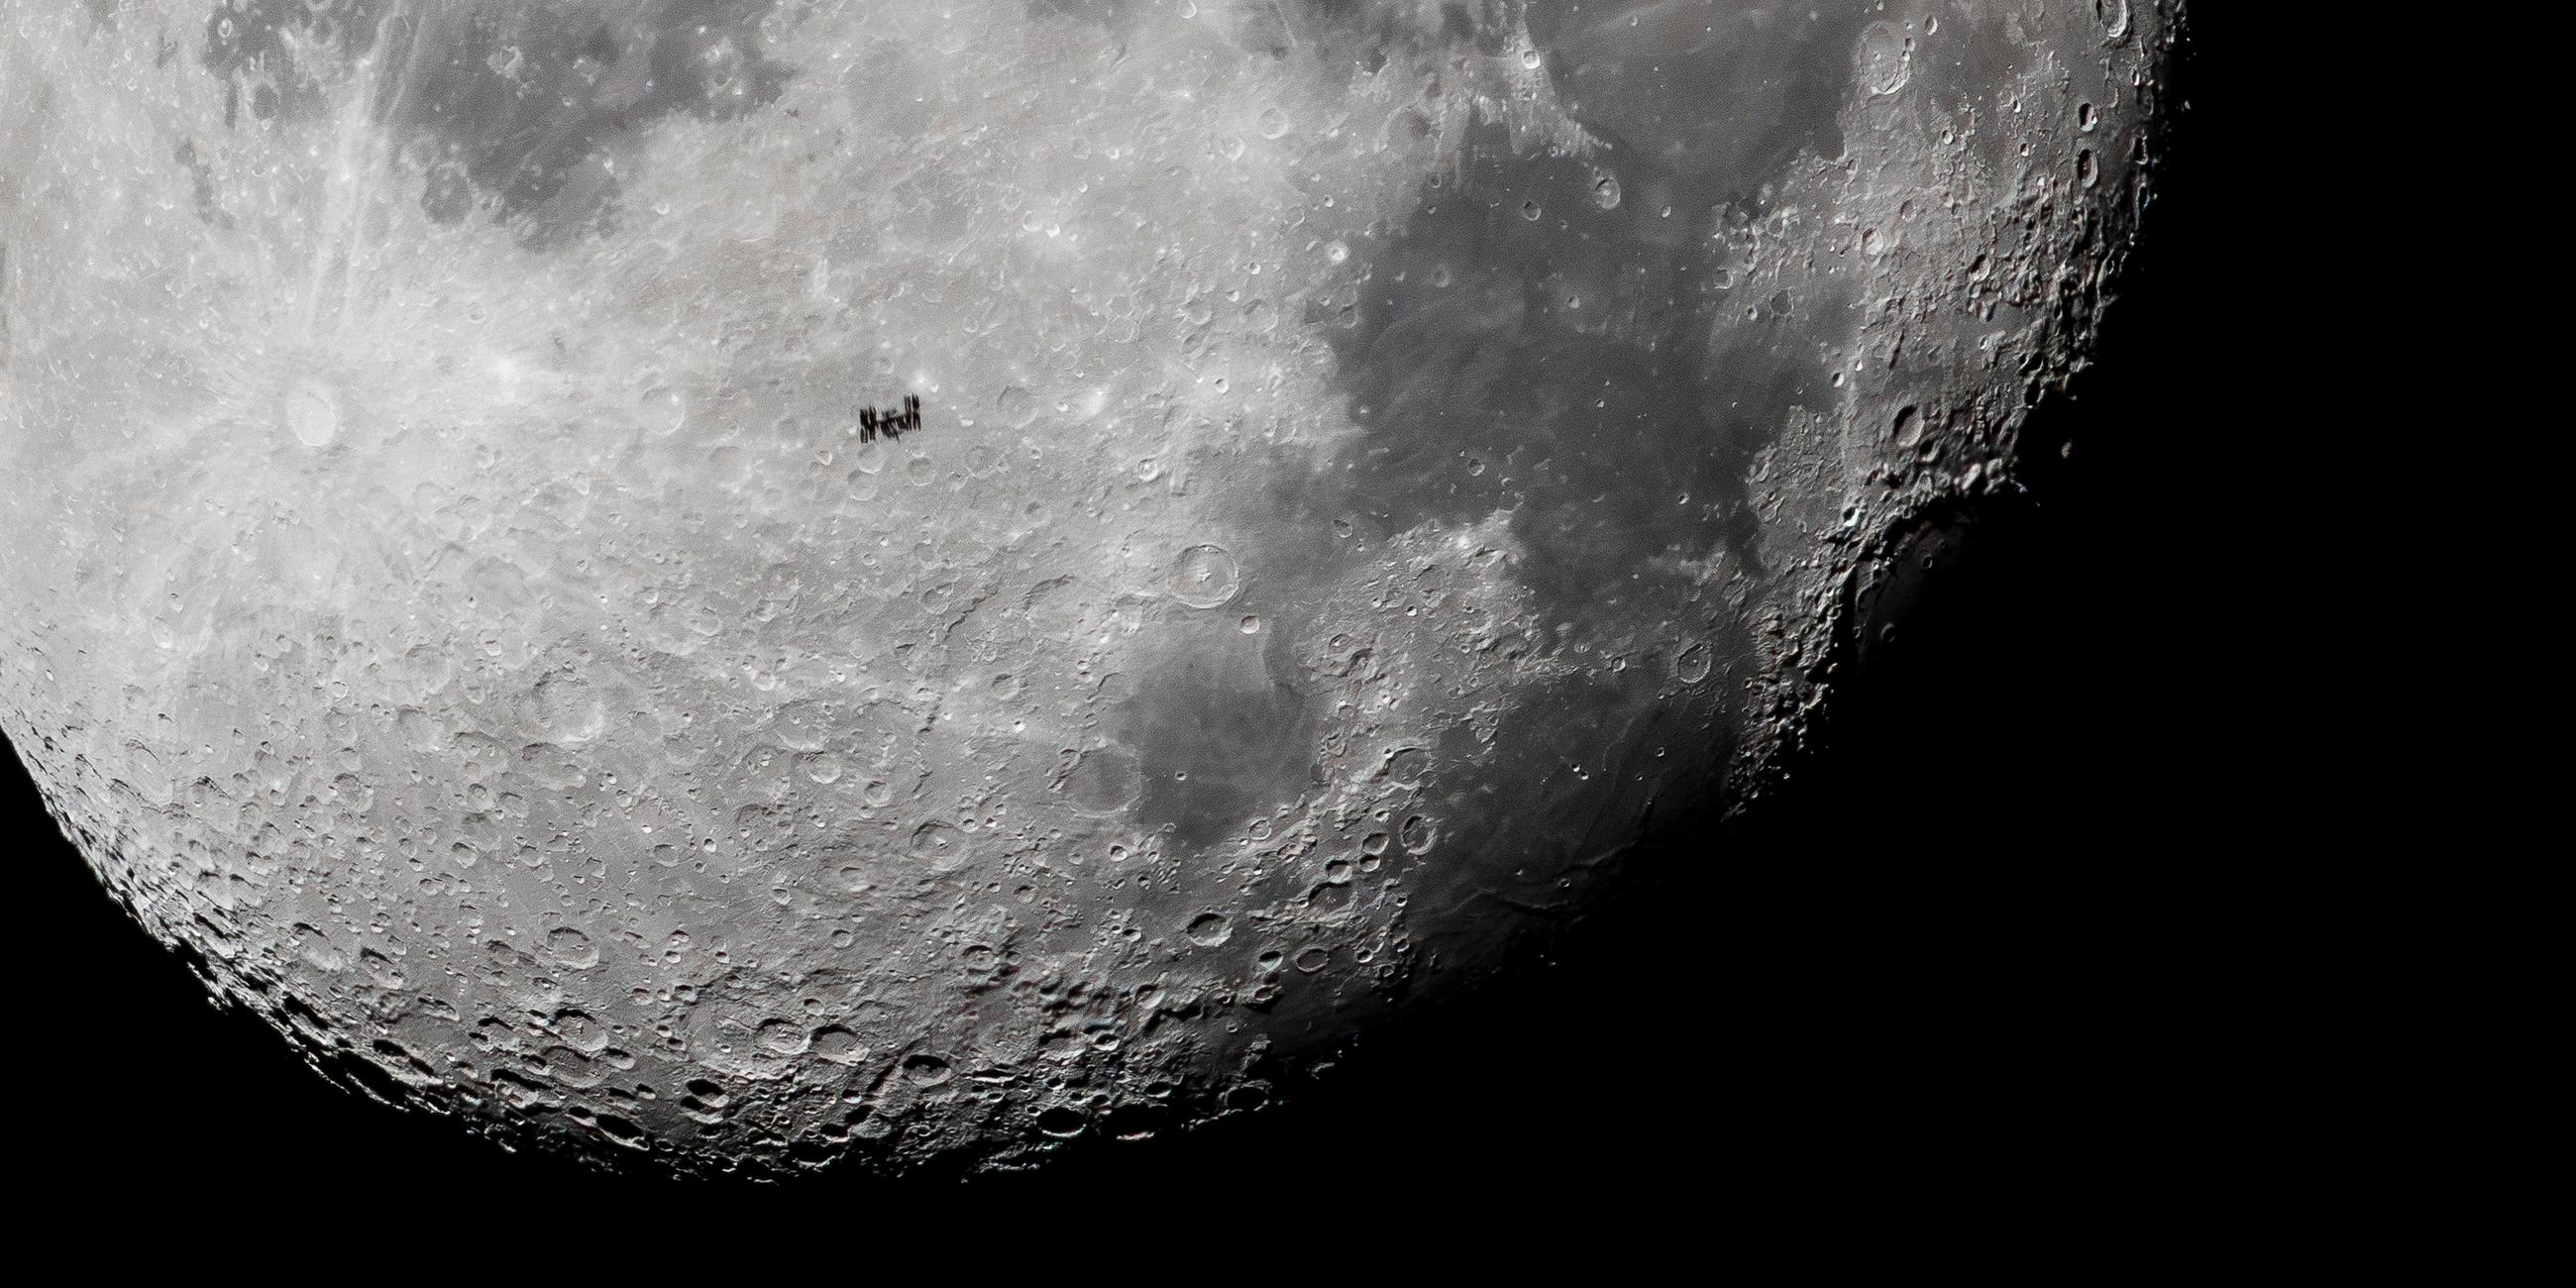 International Space Station (ISS) passes in front of the Moon